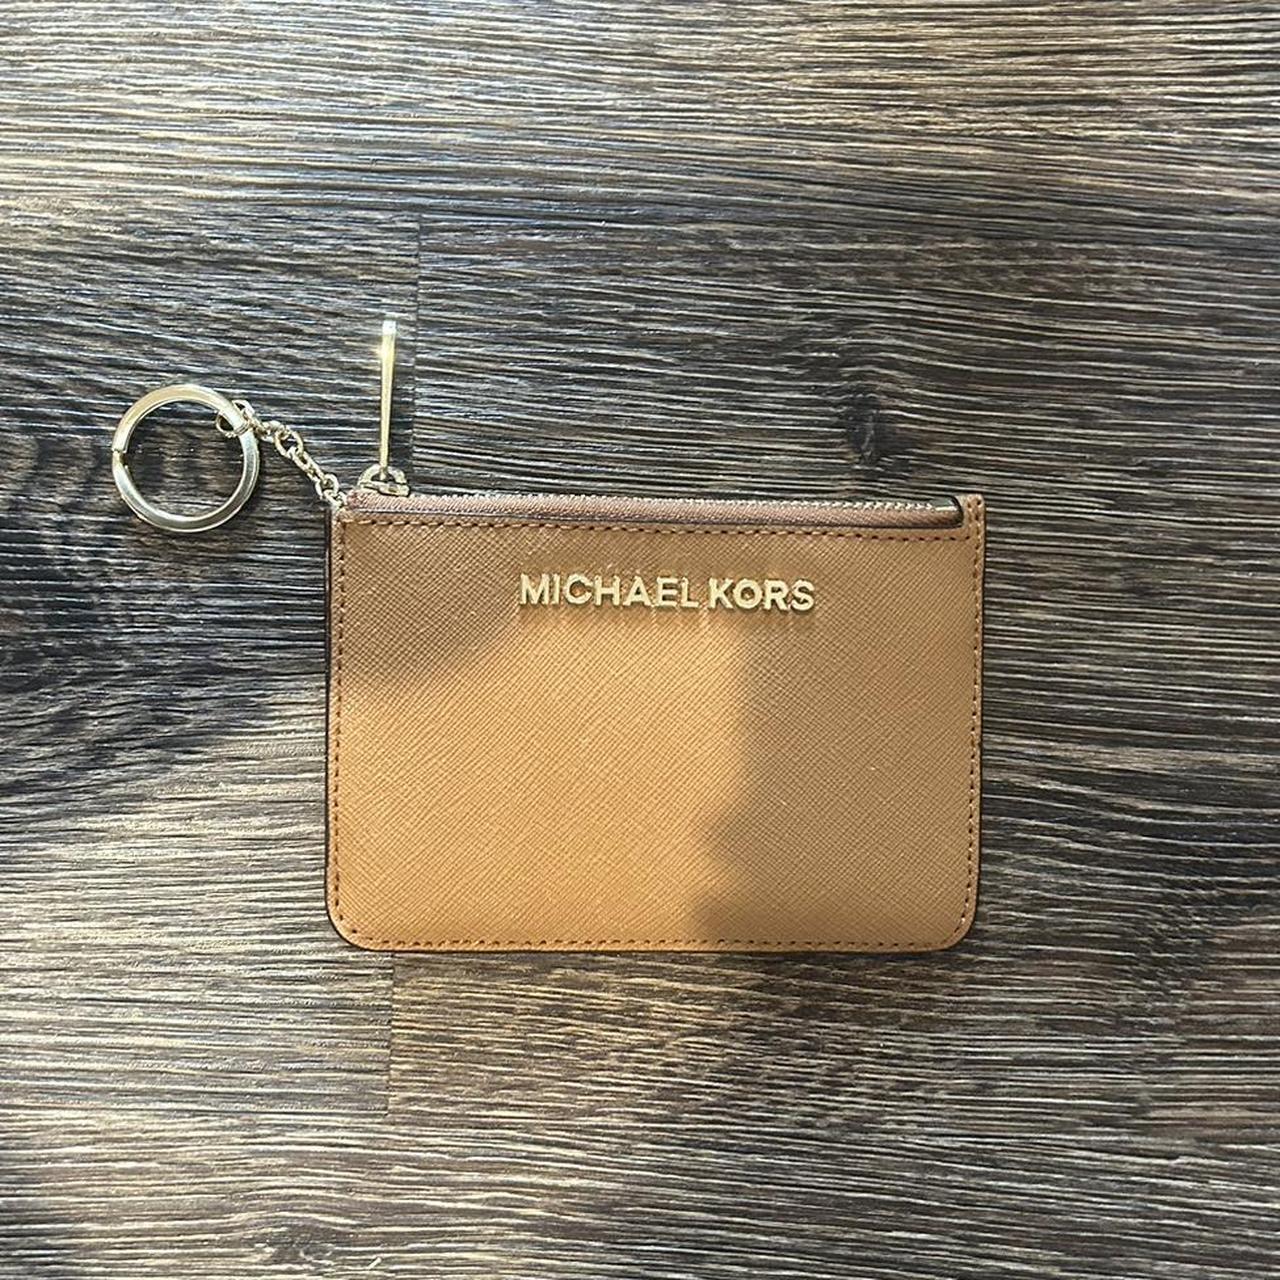 Michael Kors Key Ring Top Zip Coin Pouch Id Card Finland | Ubuy